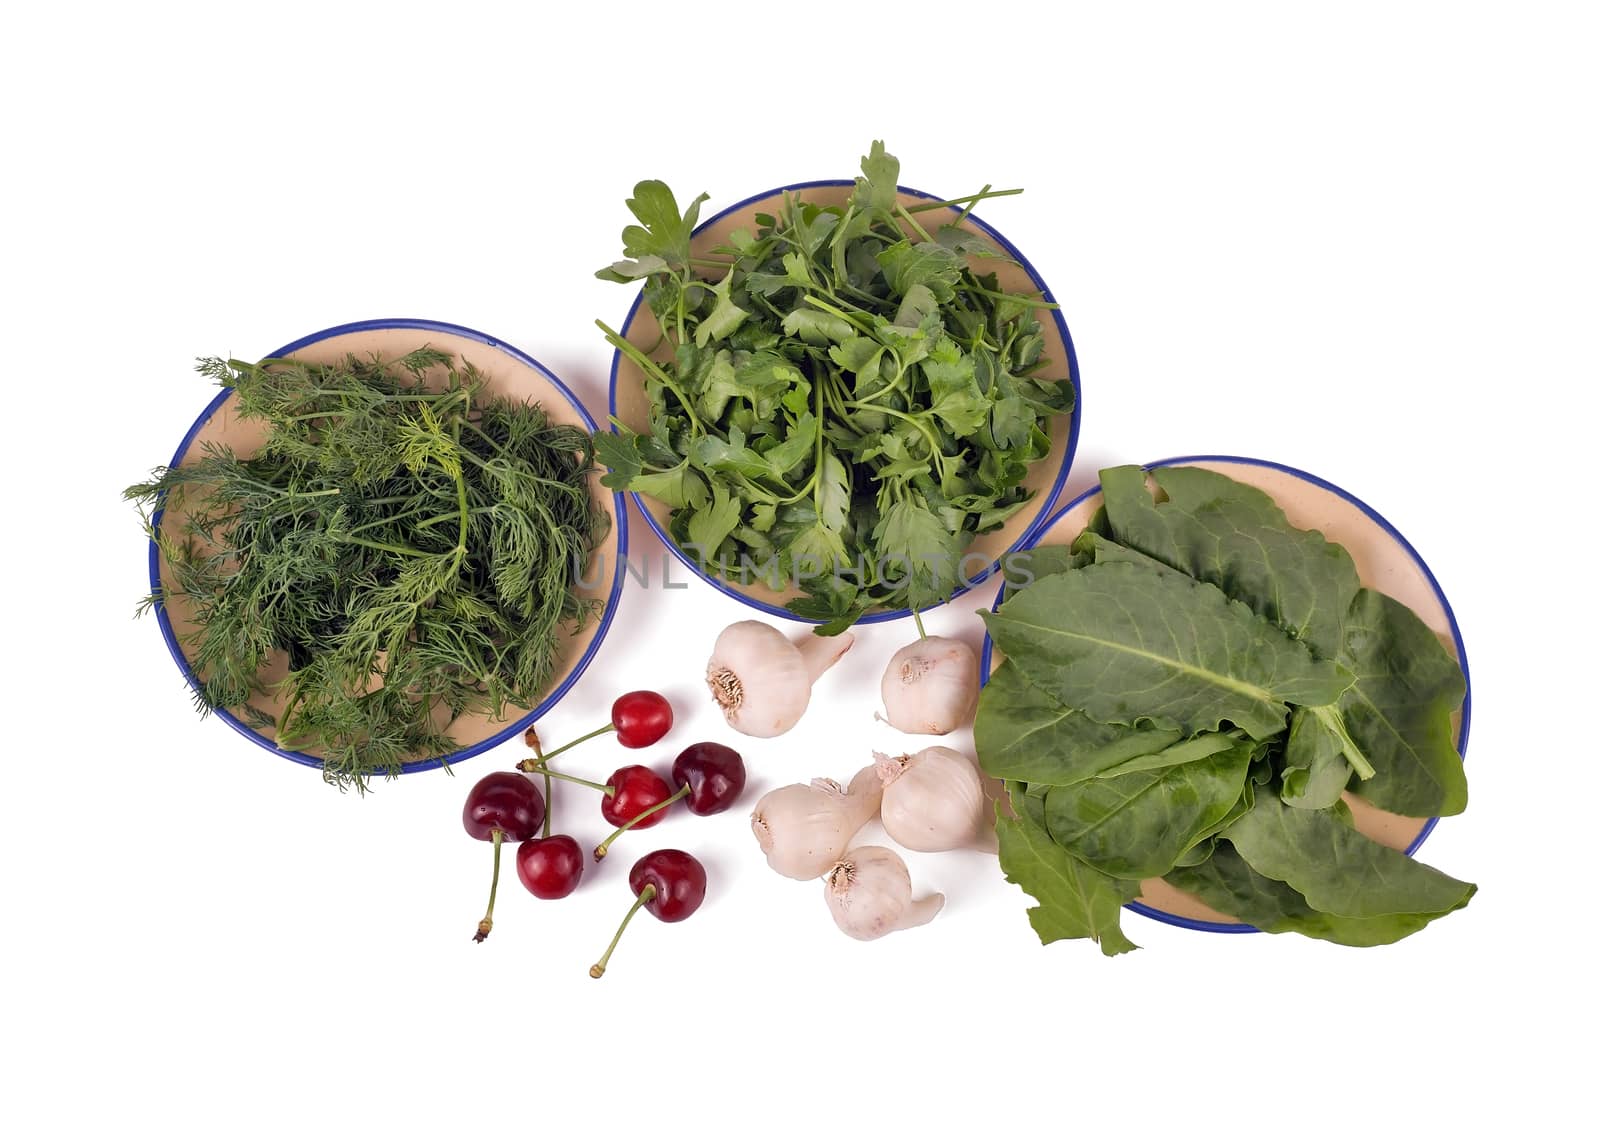 Daily healthy food ingredients: parsley, fennel, sorrel, garlic, sweet cherry on a white background